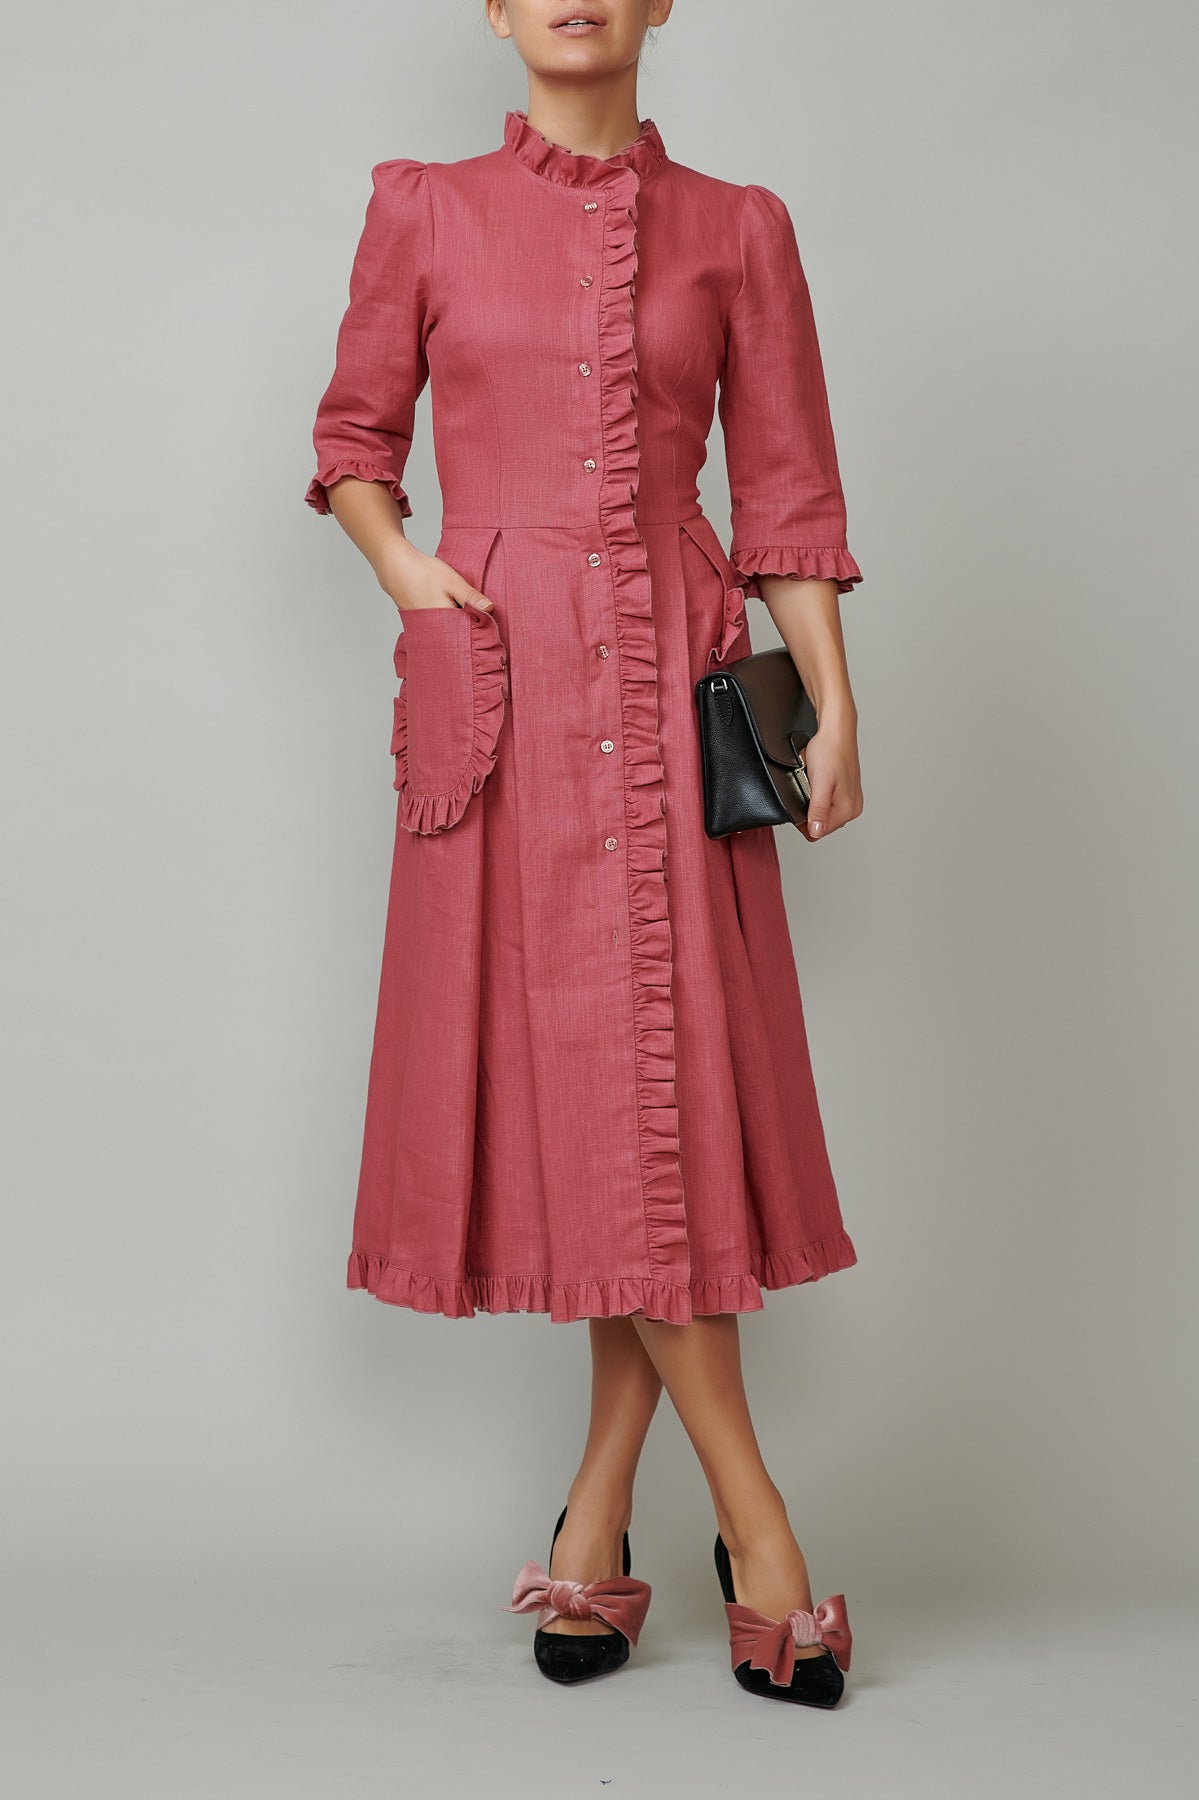 Shirt dress with applied pockets and ruffles, made of pink linen